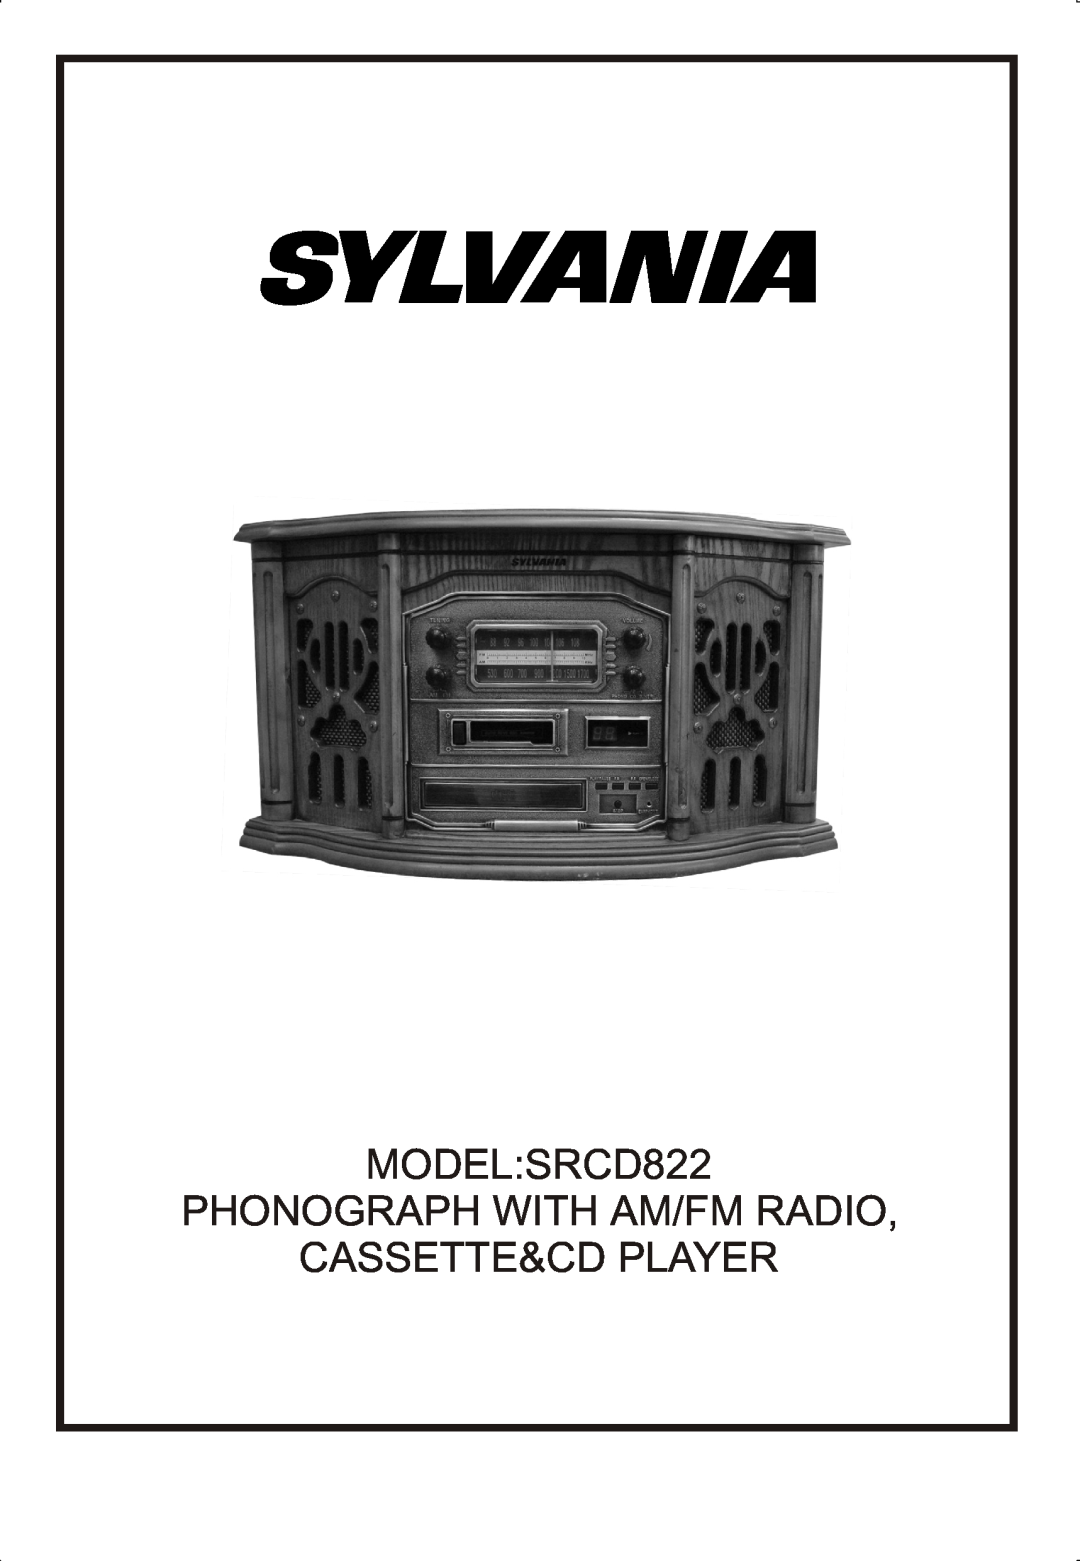 Sylvania manual MODEL SRCD822 PHONOGRAPH WITH AM/FM RADIO, Cassette&Cd Player 